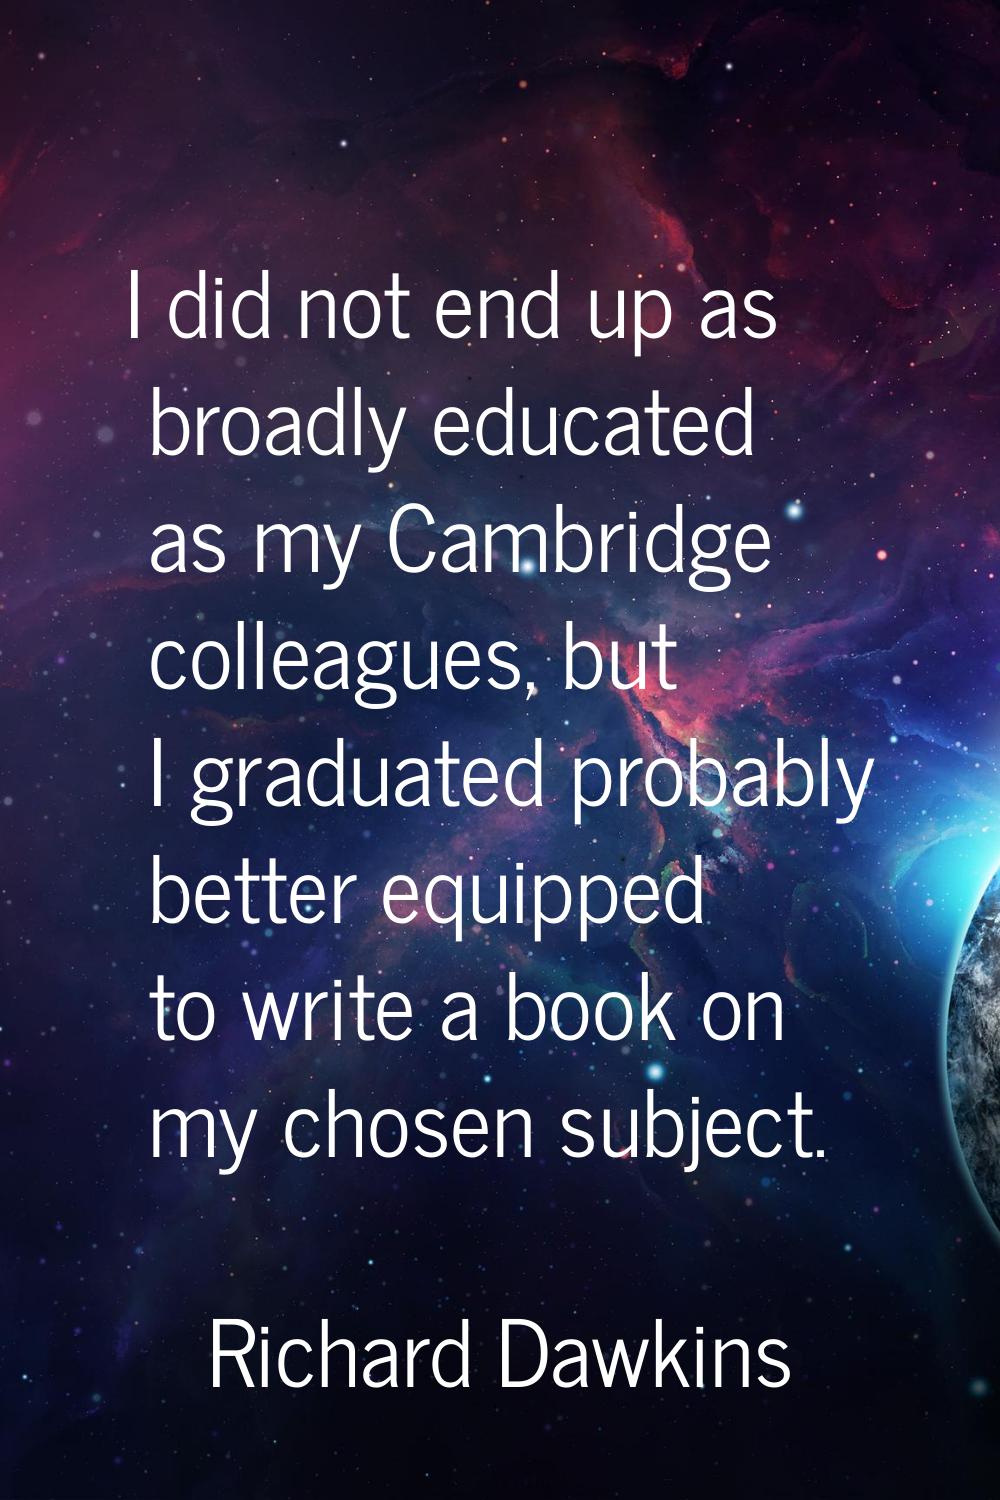 I did not end up as broadly educated as my Cambridge colleagues, but I graduated probably better eq